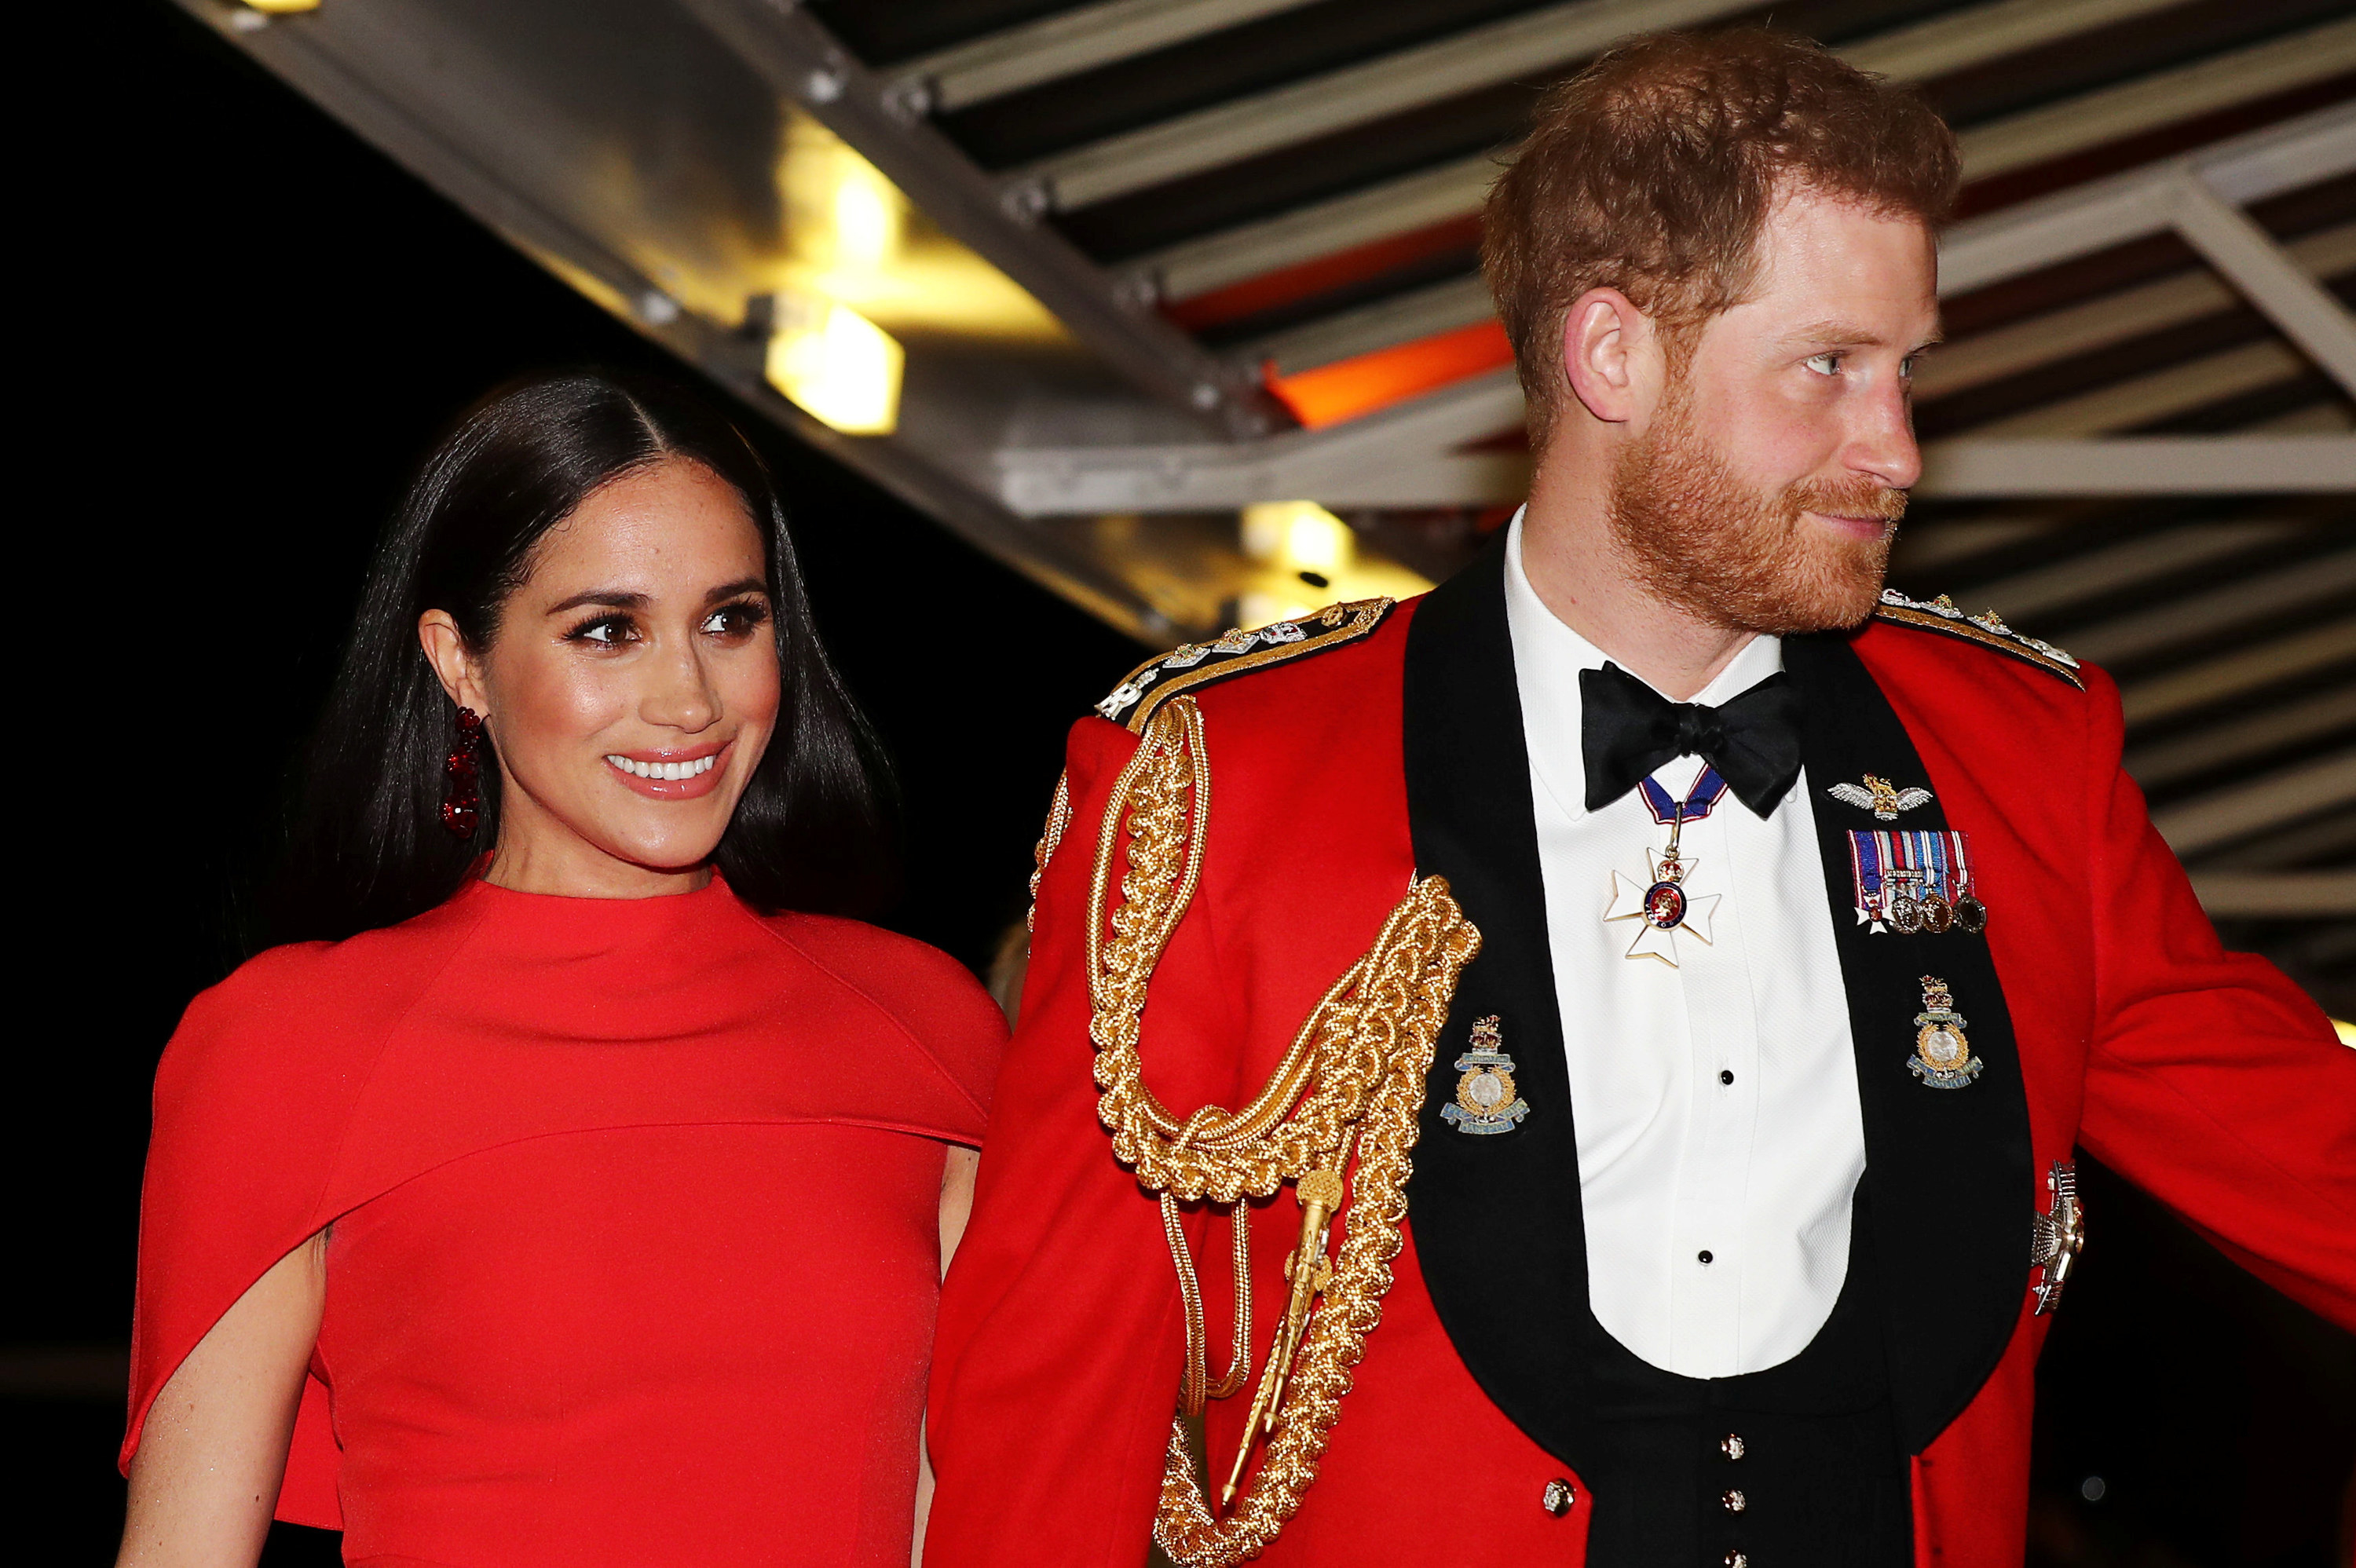 Harry and Meghan are dressed up in formal wear while heading to an event